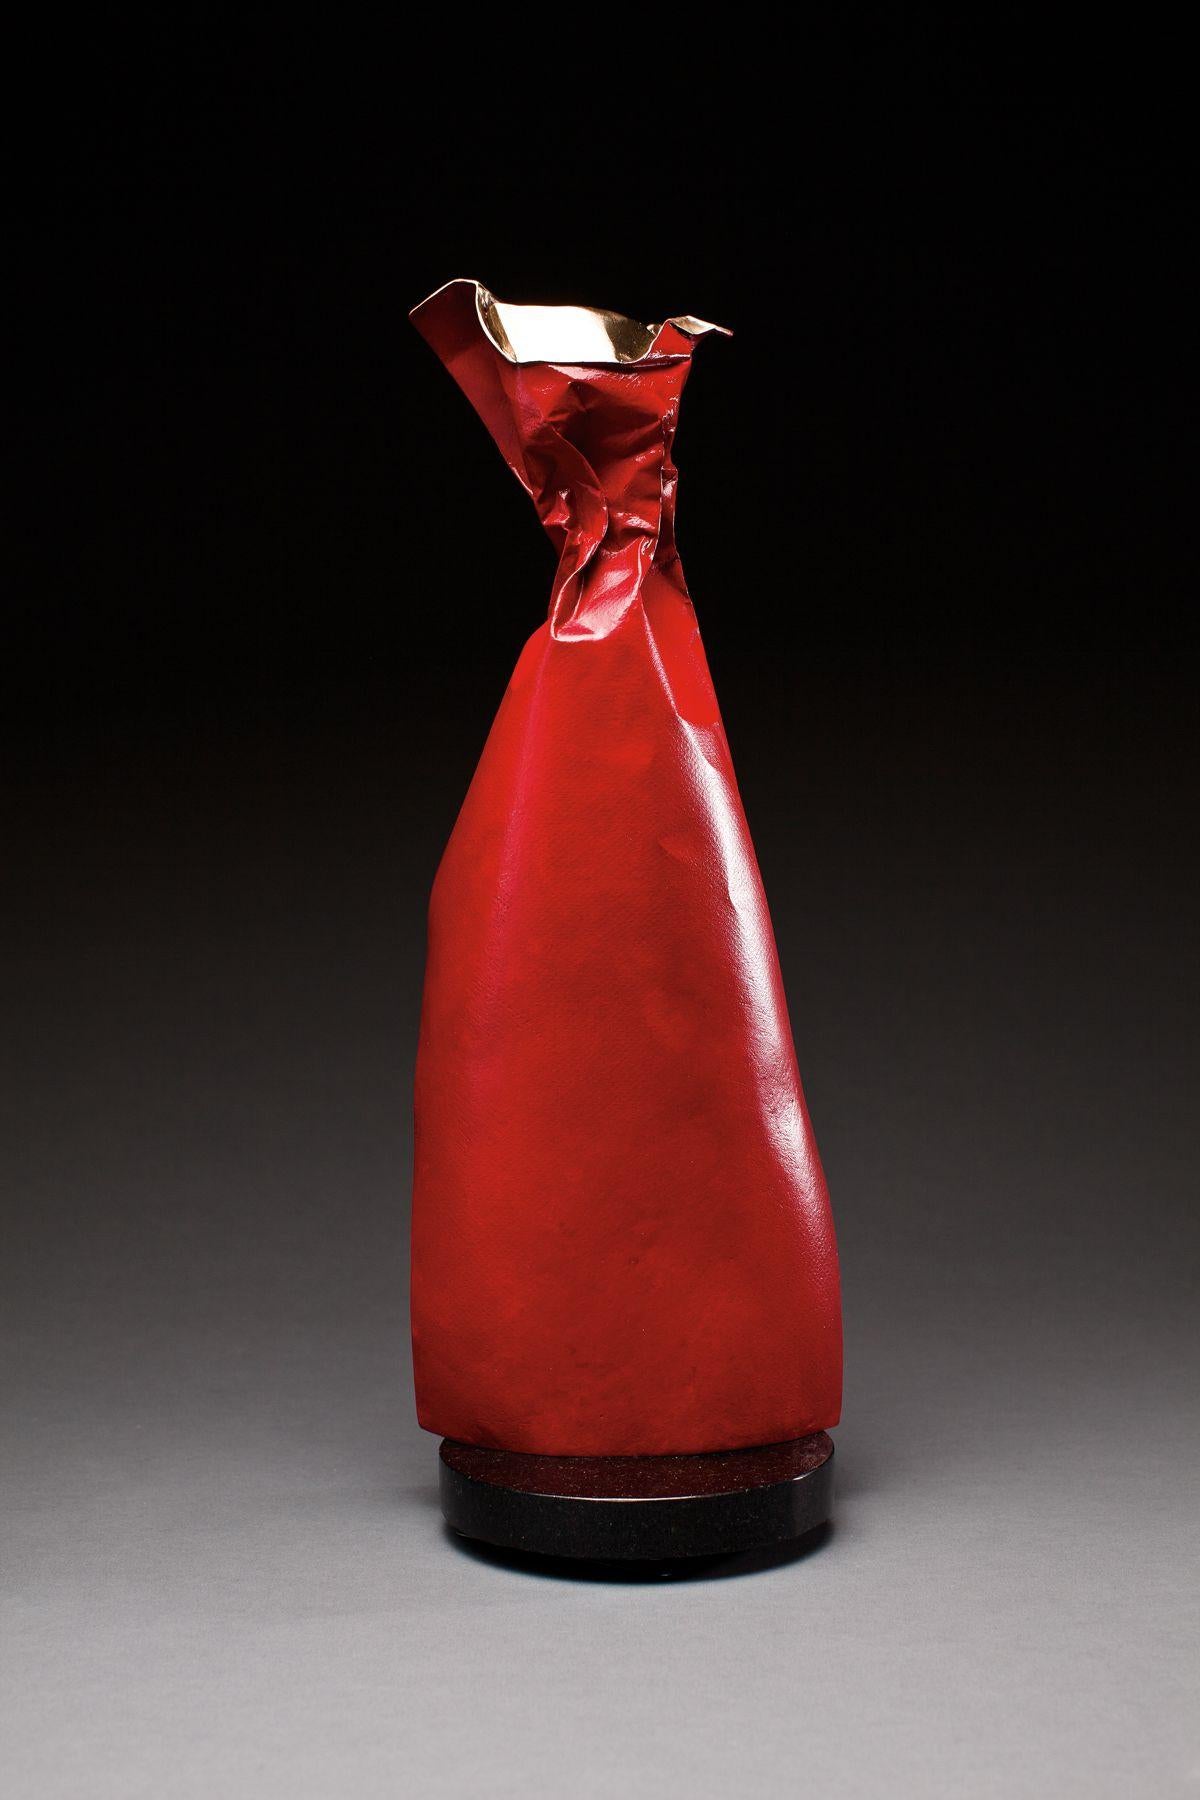 Abstract Sculpture Kevin Box - Kevin et Jennifer Box - Couture rouge 12/24 -